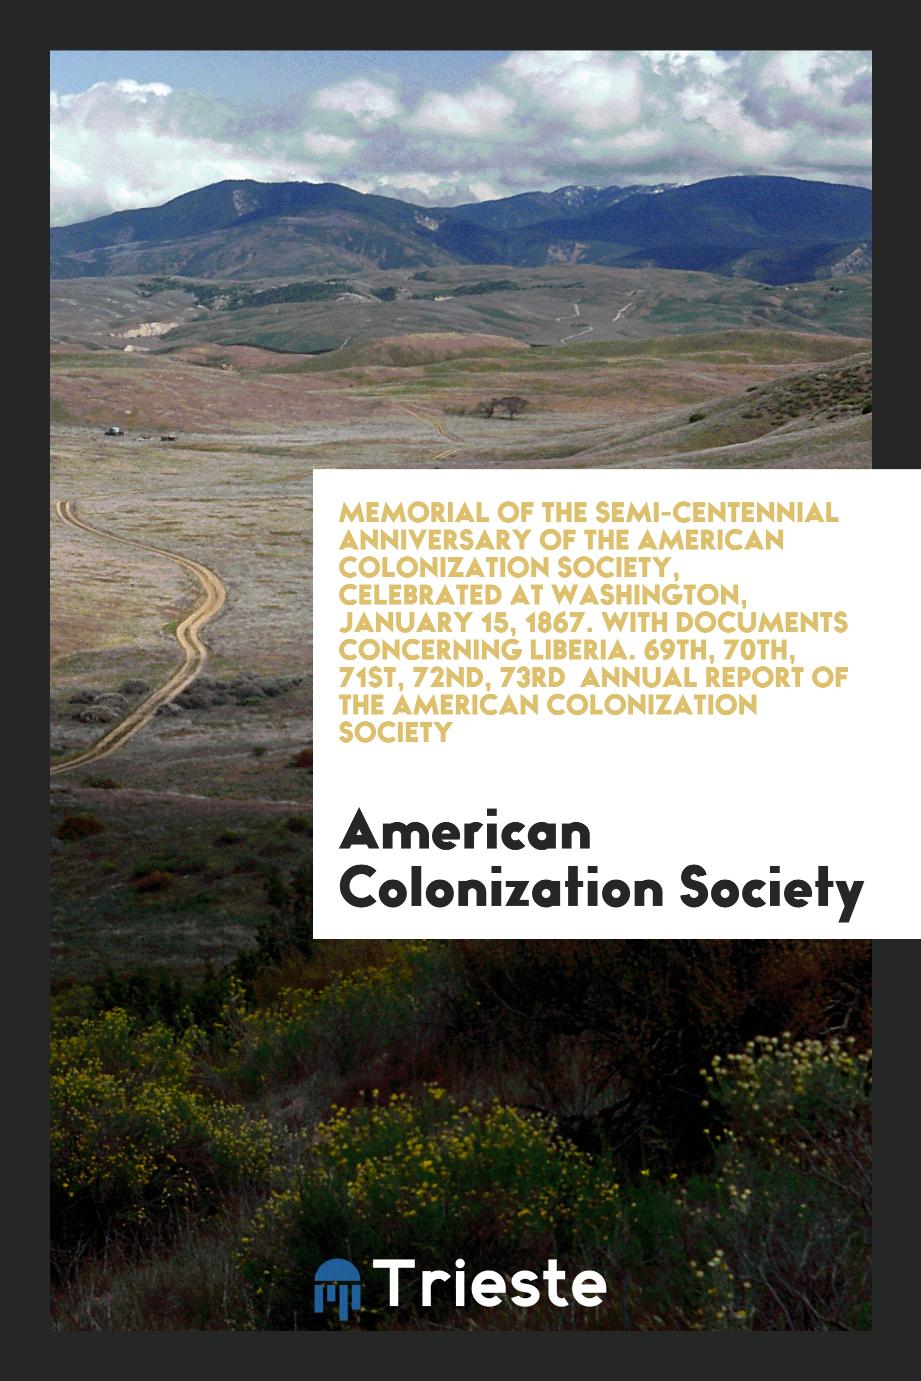 Memorial of the Semi-Centennial Anniversary of the American Colonization Society, Celebrated at Washington, January 15, 1867. With Documents Concerning Liberia. 69th, 70th, 71st, 72nd, 73rd Annual Report of the American Colonization Society